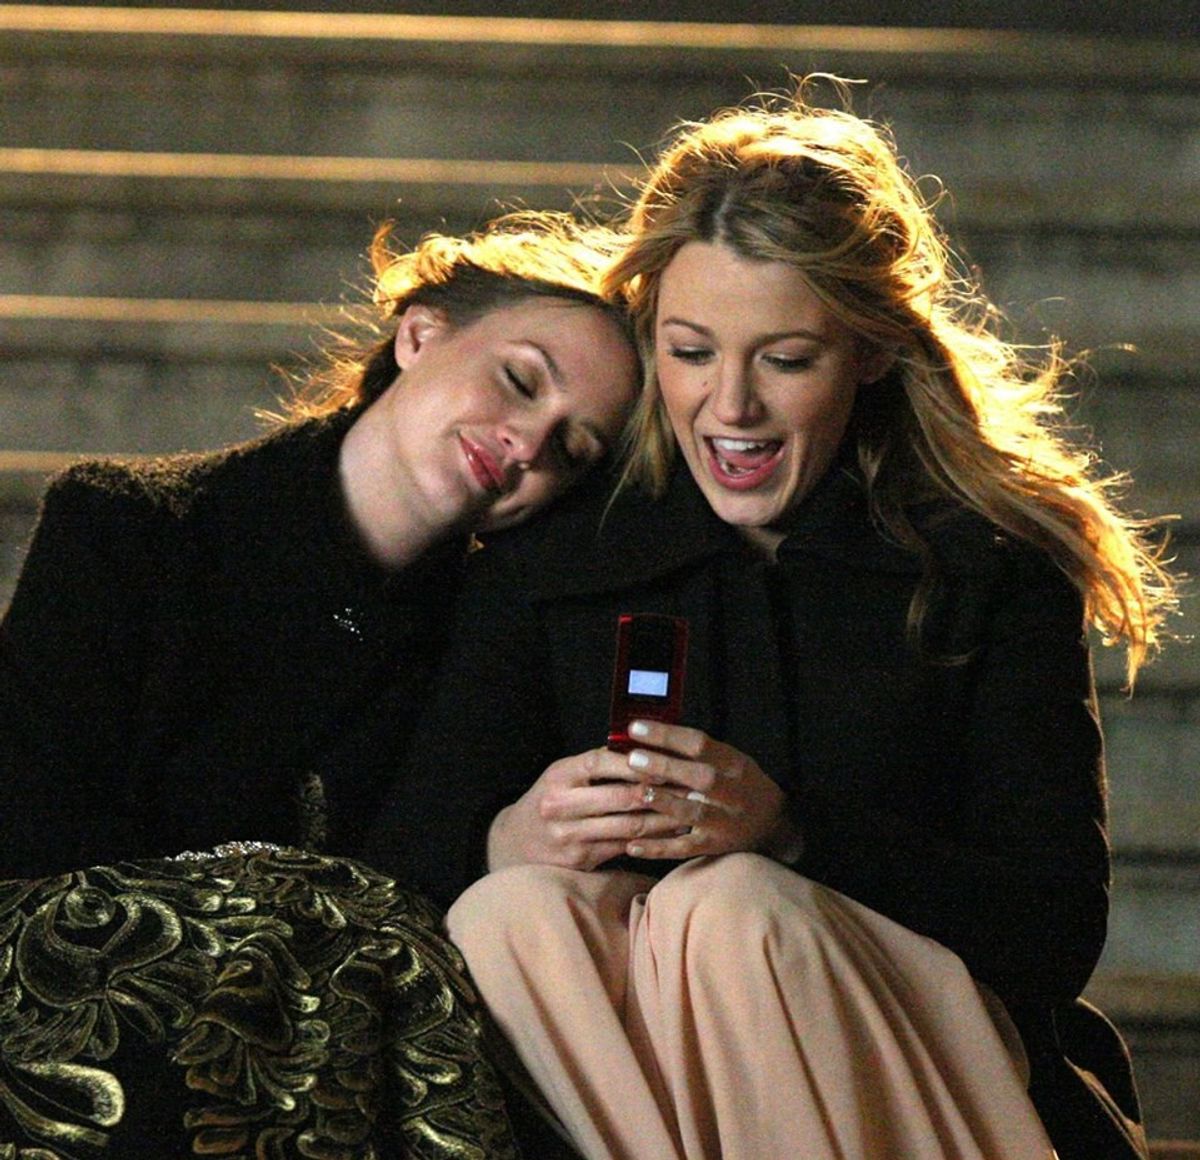 5 Things I Wish I Told My Best Friends More Often